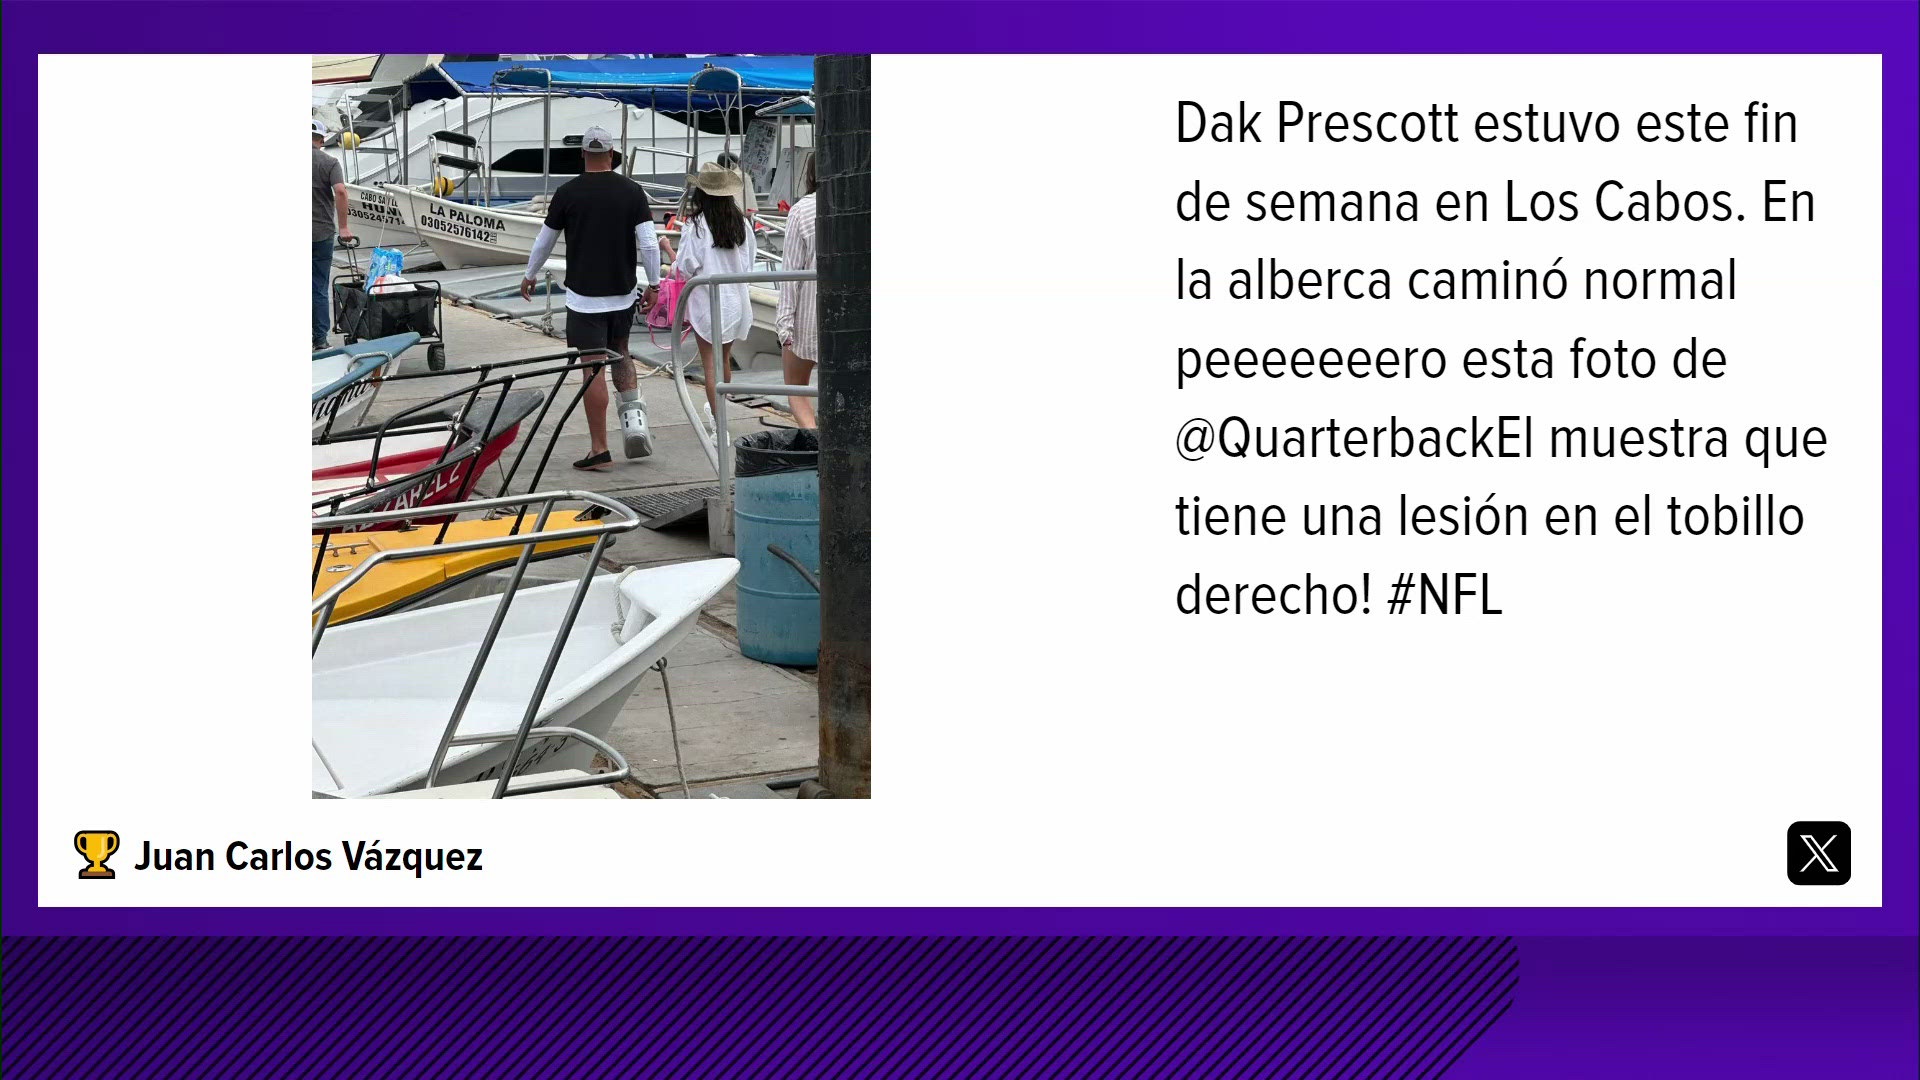 The photo was reportedly taken while Prescott was on vacation in Cabo San Lucas.